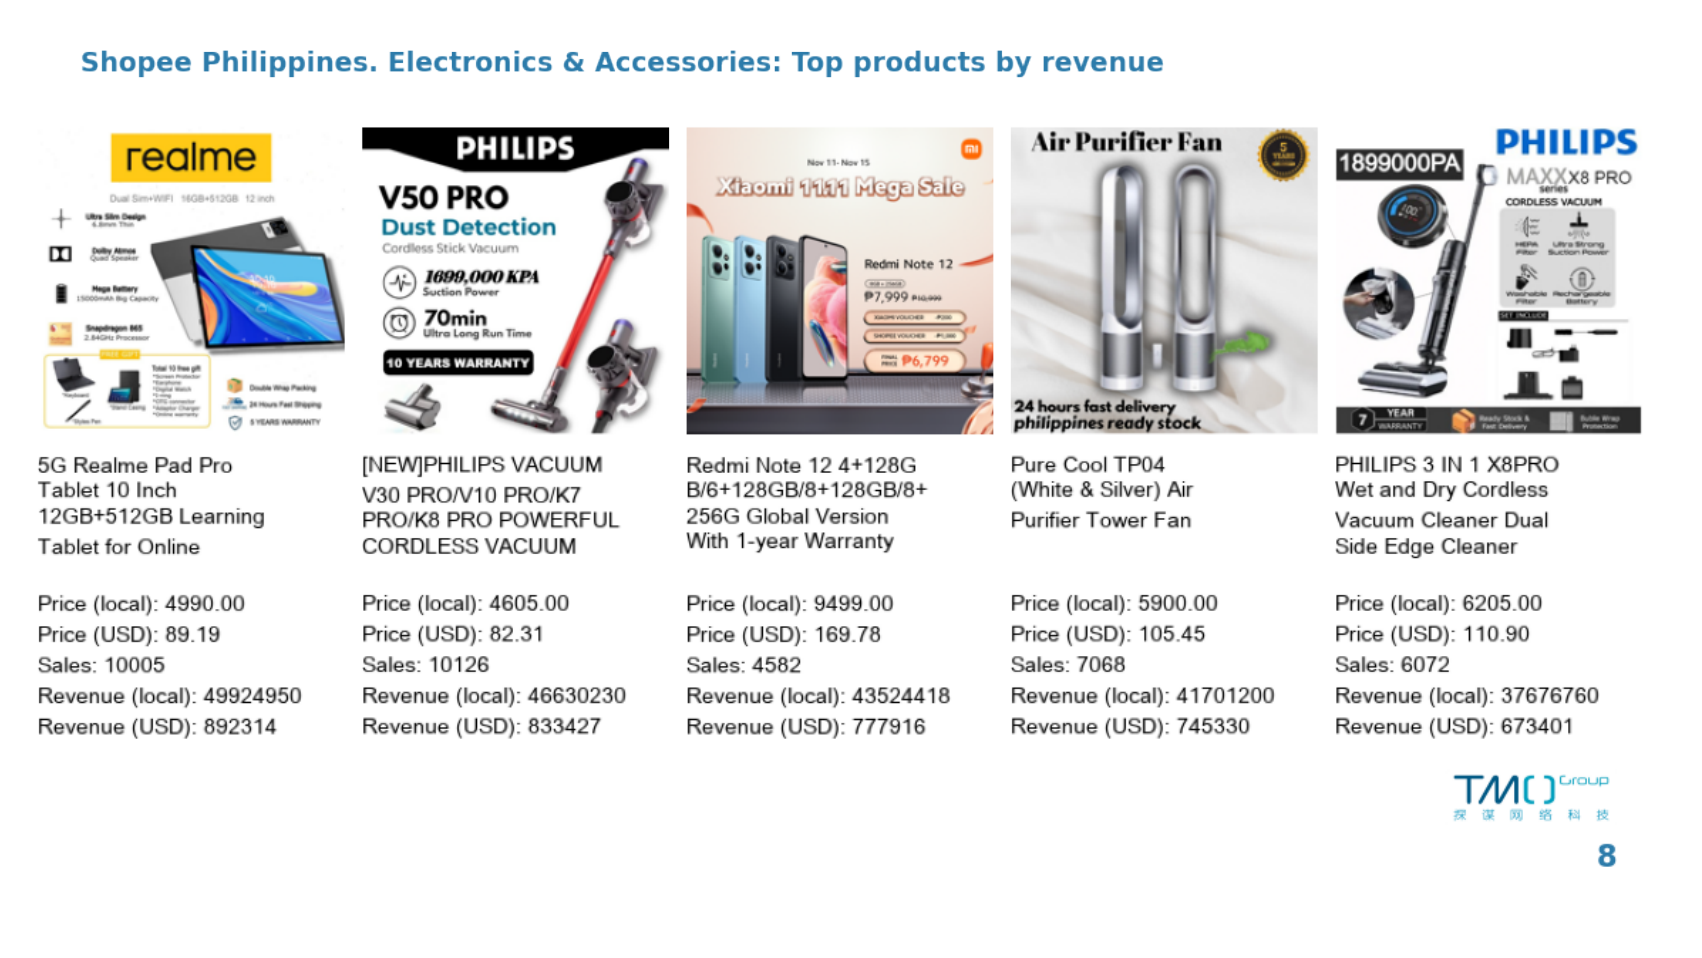 Shopee Philippines Electronics & Accessories Best Sellers